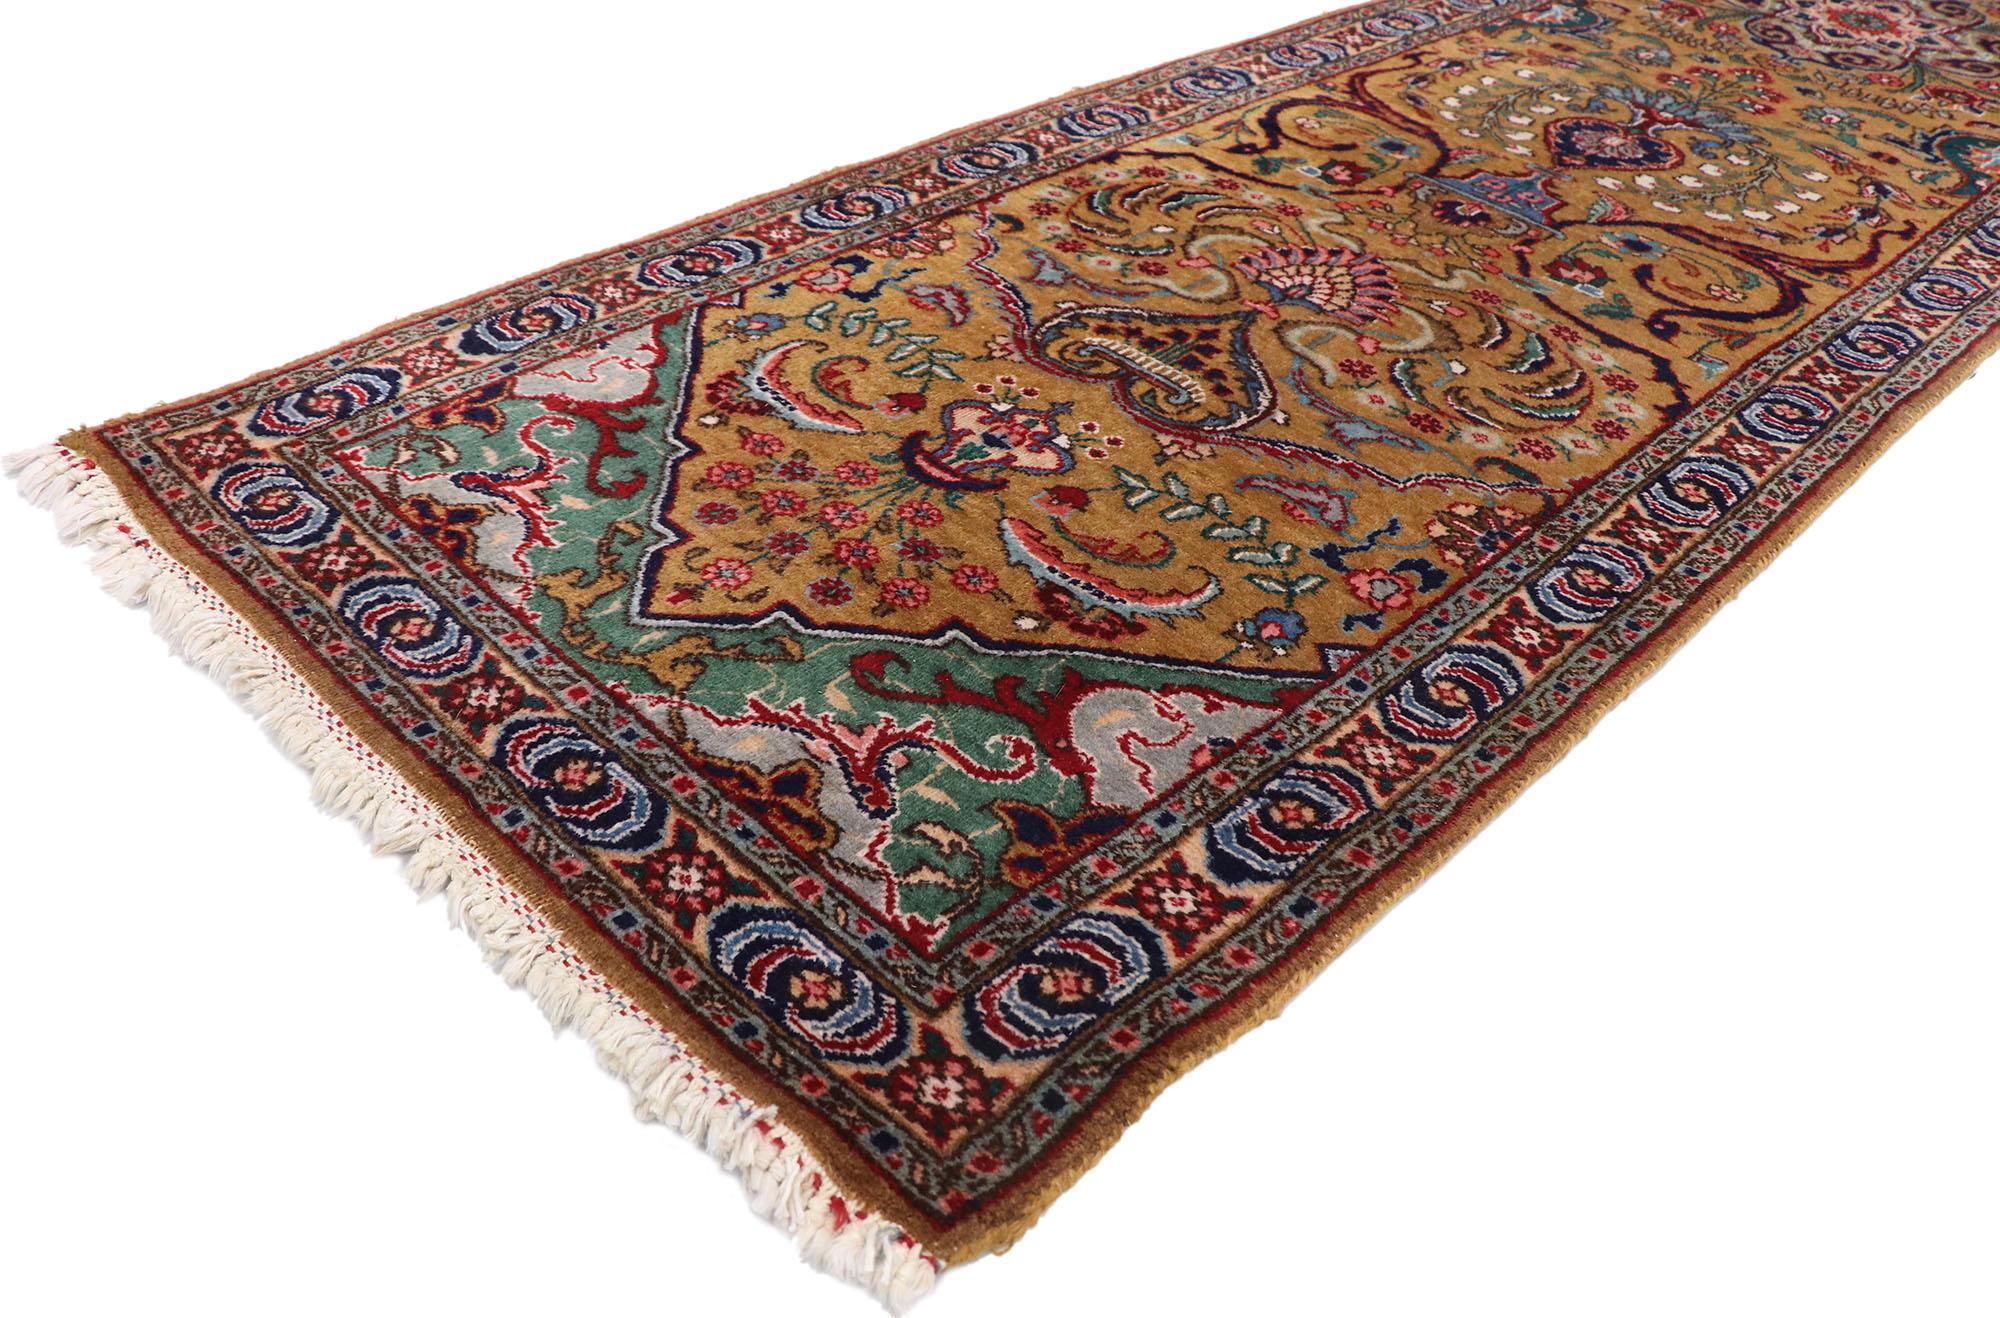 77661 Vintage Persian Tabriz runner, 02'10 x 14'00? Displaying an impressive array of floral elements with incredible detail and texture, this hand knotted vintage Persian Tabriz runner is a captivating vision of woven beauty. The timeless design